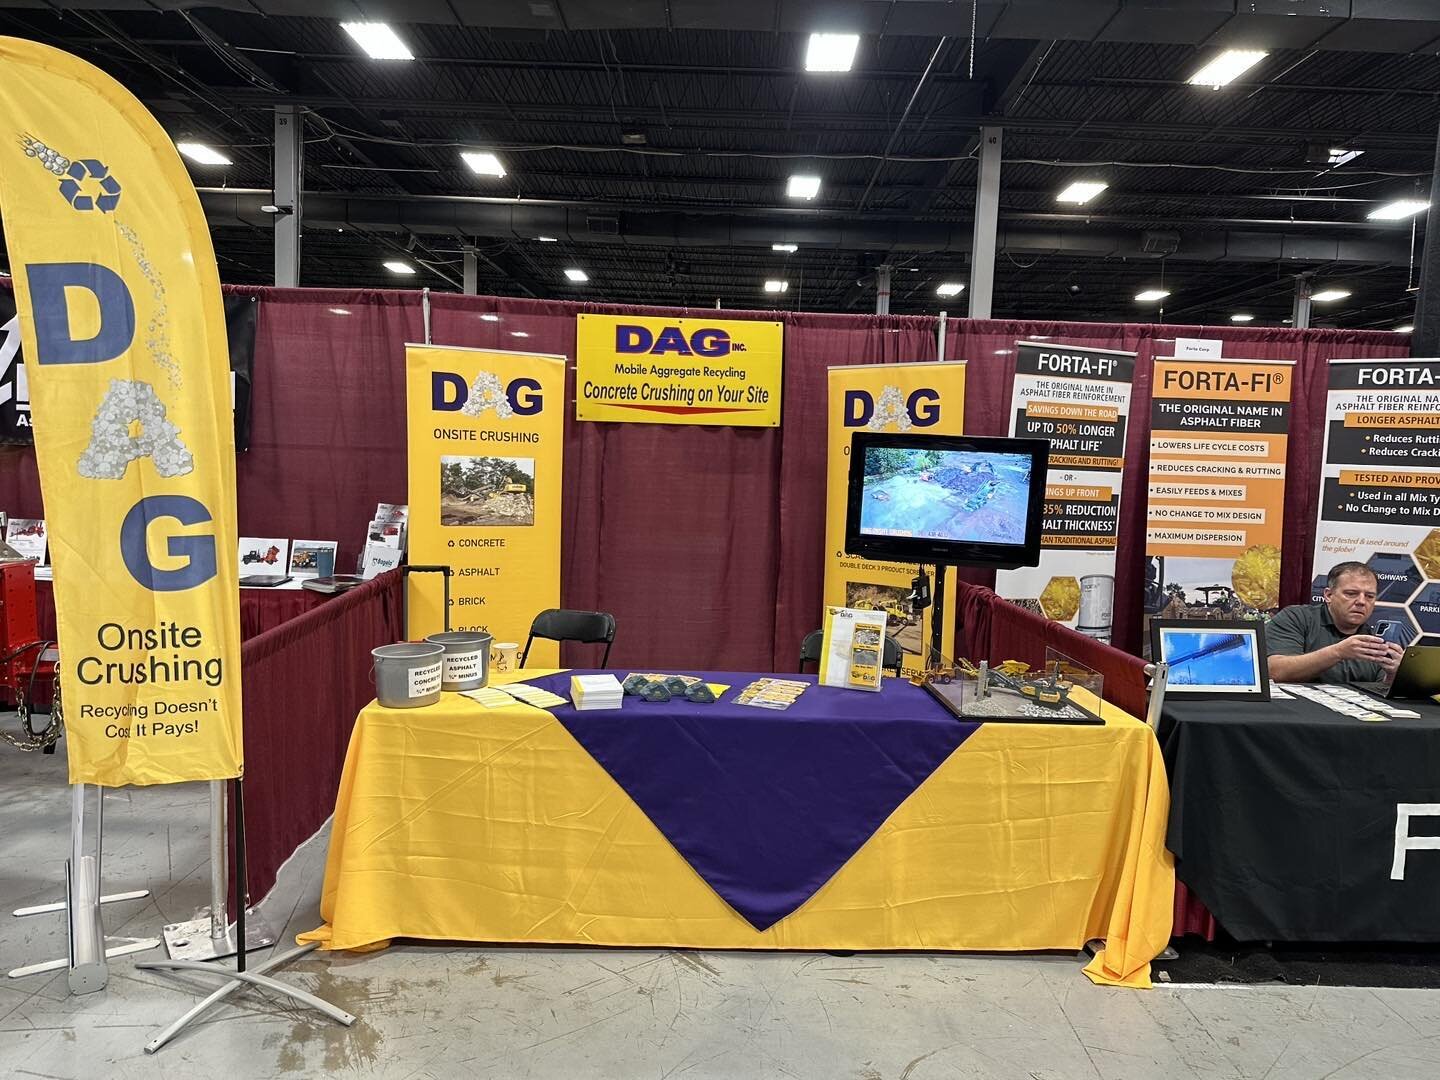 DAG exhibited at the NJ Public show great event